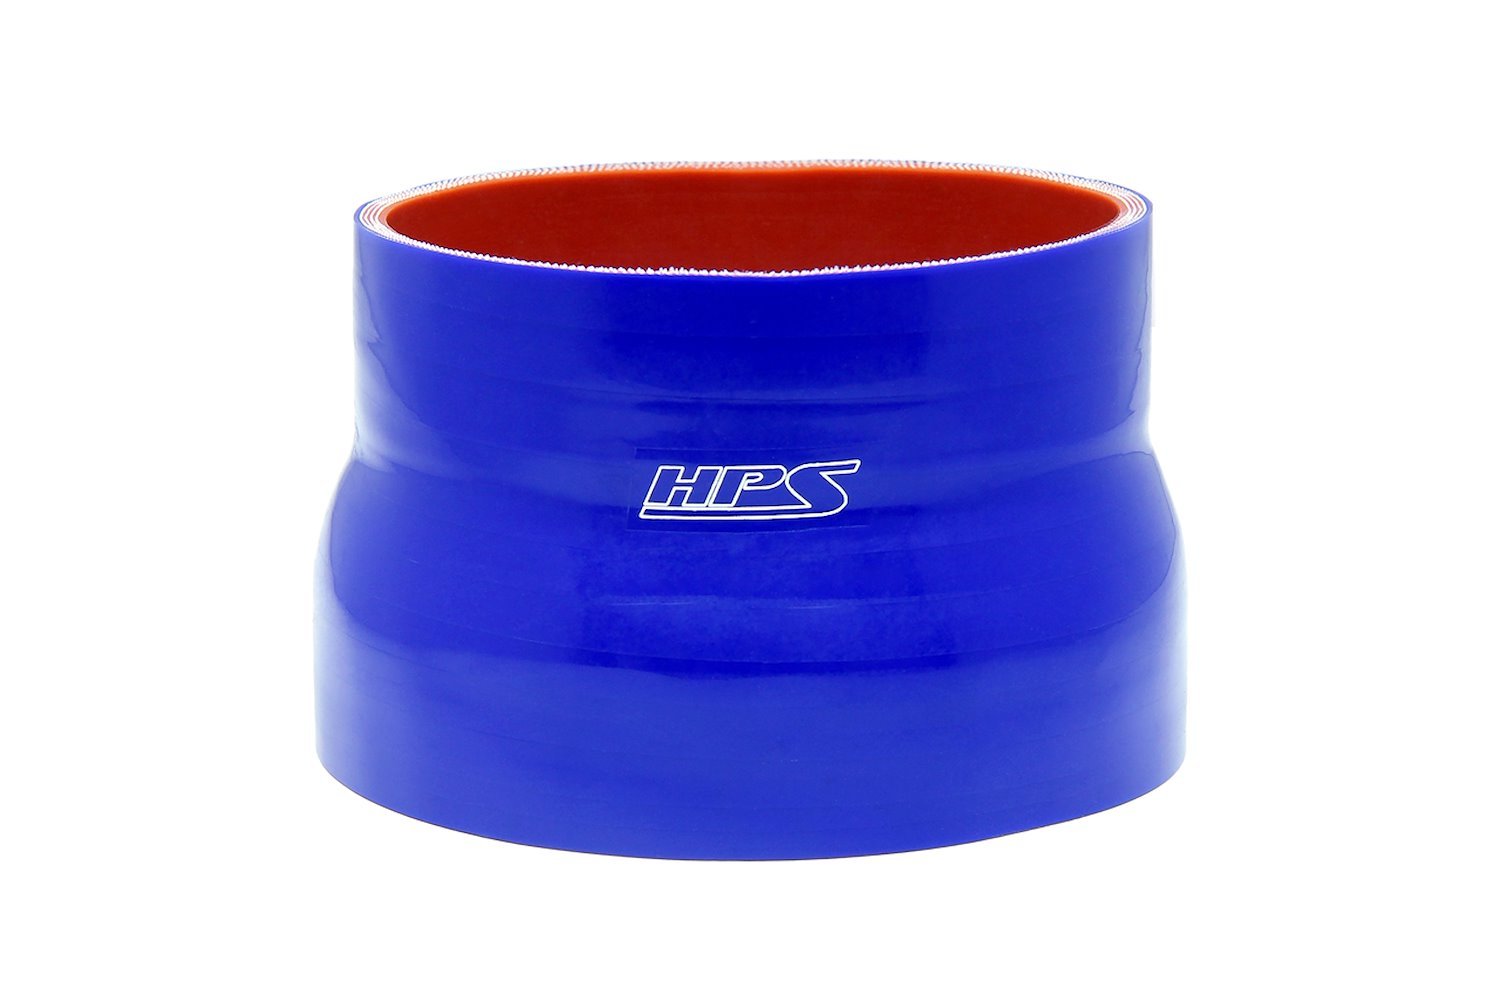 HTSR-400-450-BLUE Silicone Reducer Hose, High-Temp 4-Ply Reinforced, 4 in. - 4-1/2 in. ID, 3 in. Long, Blue